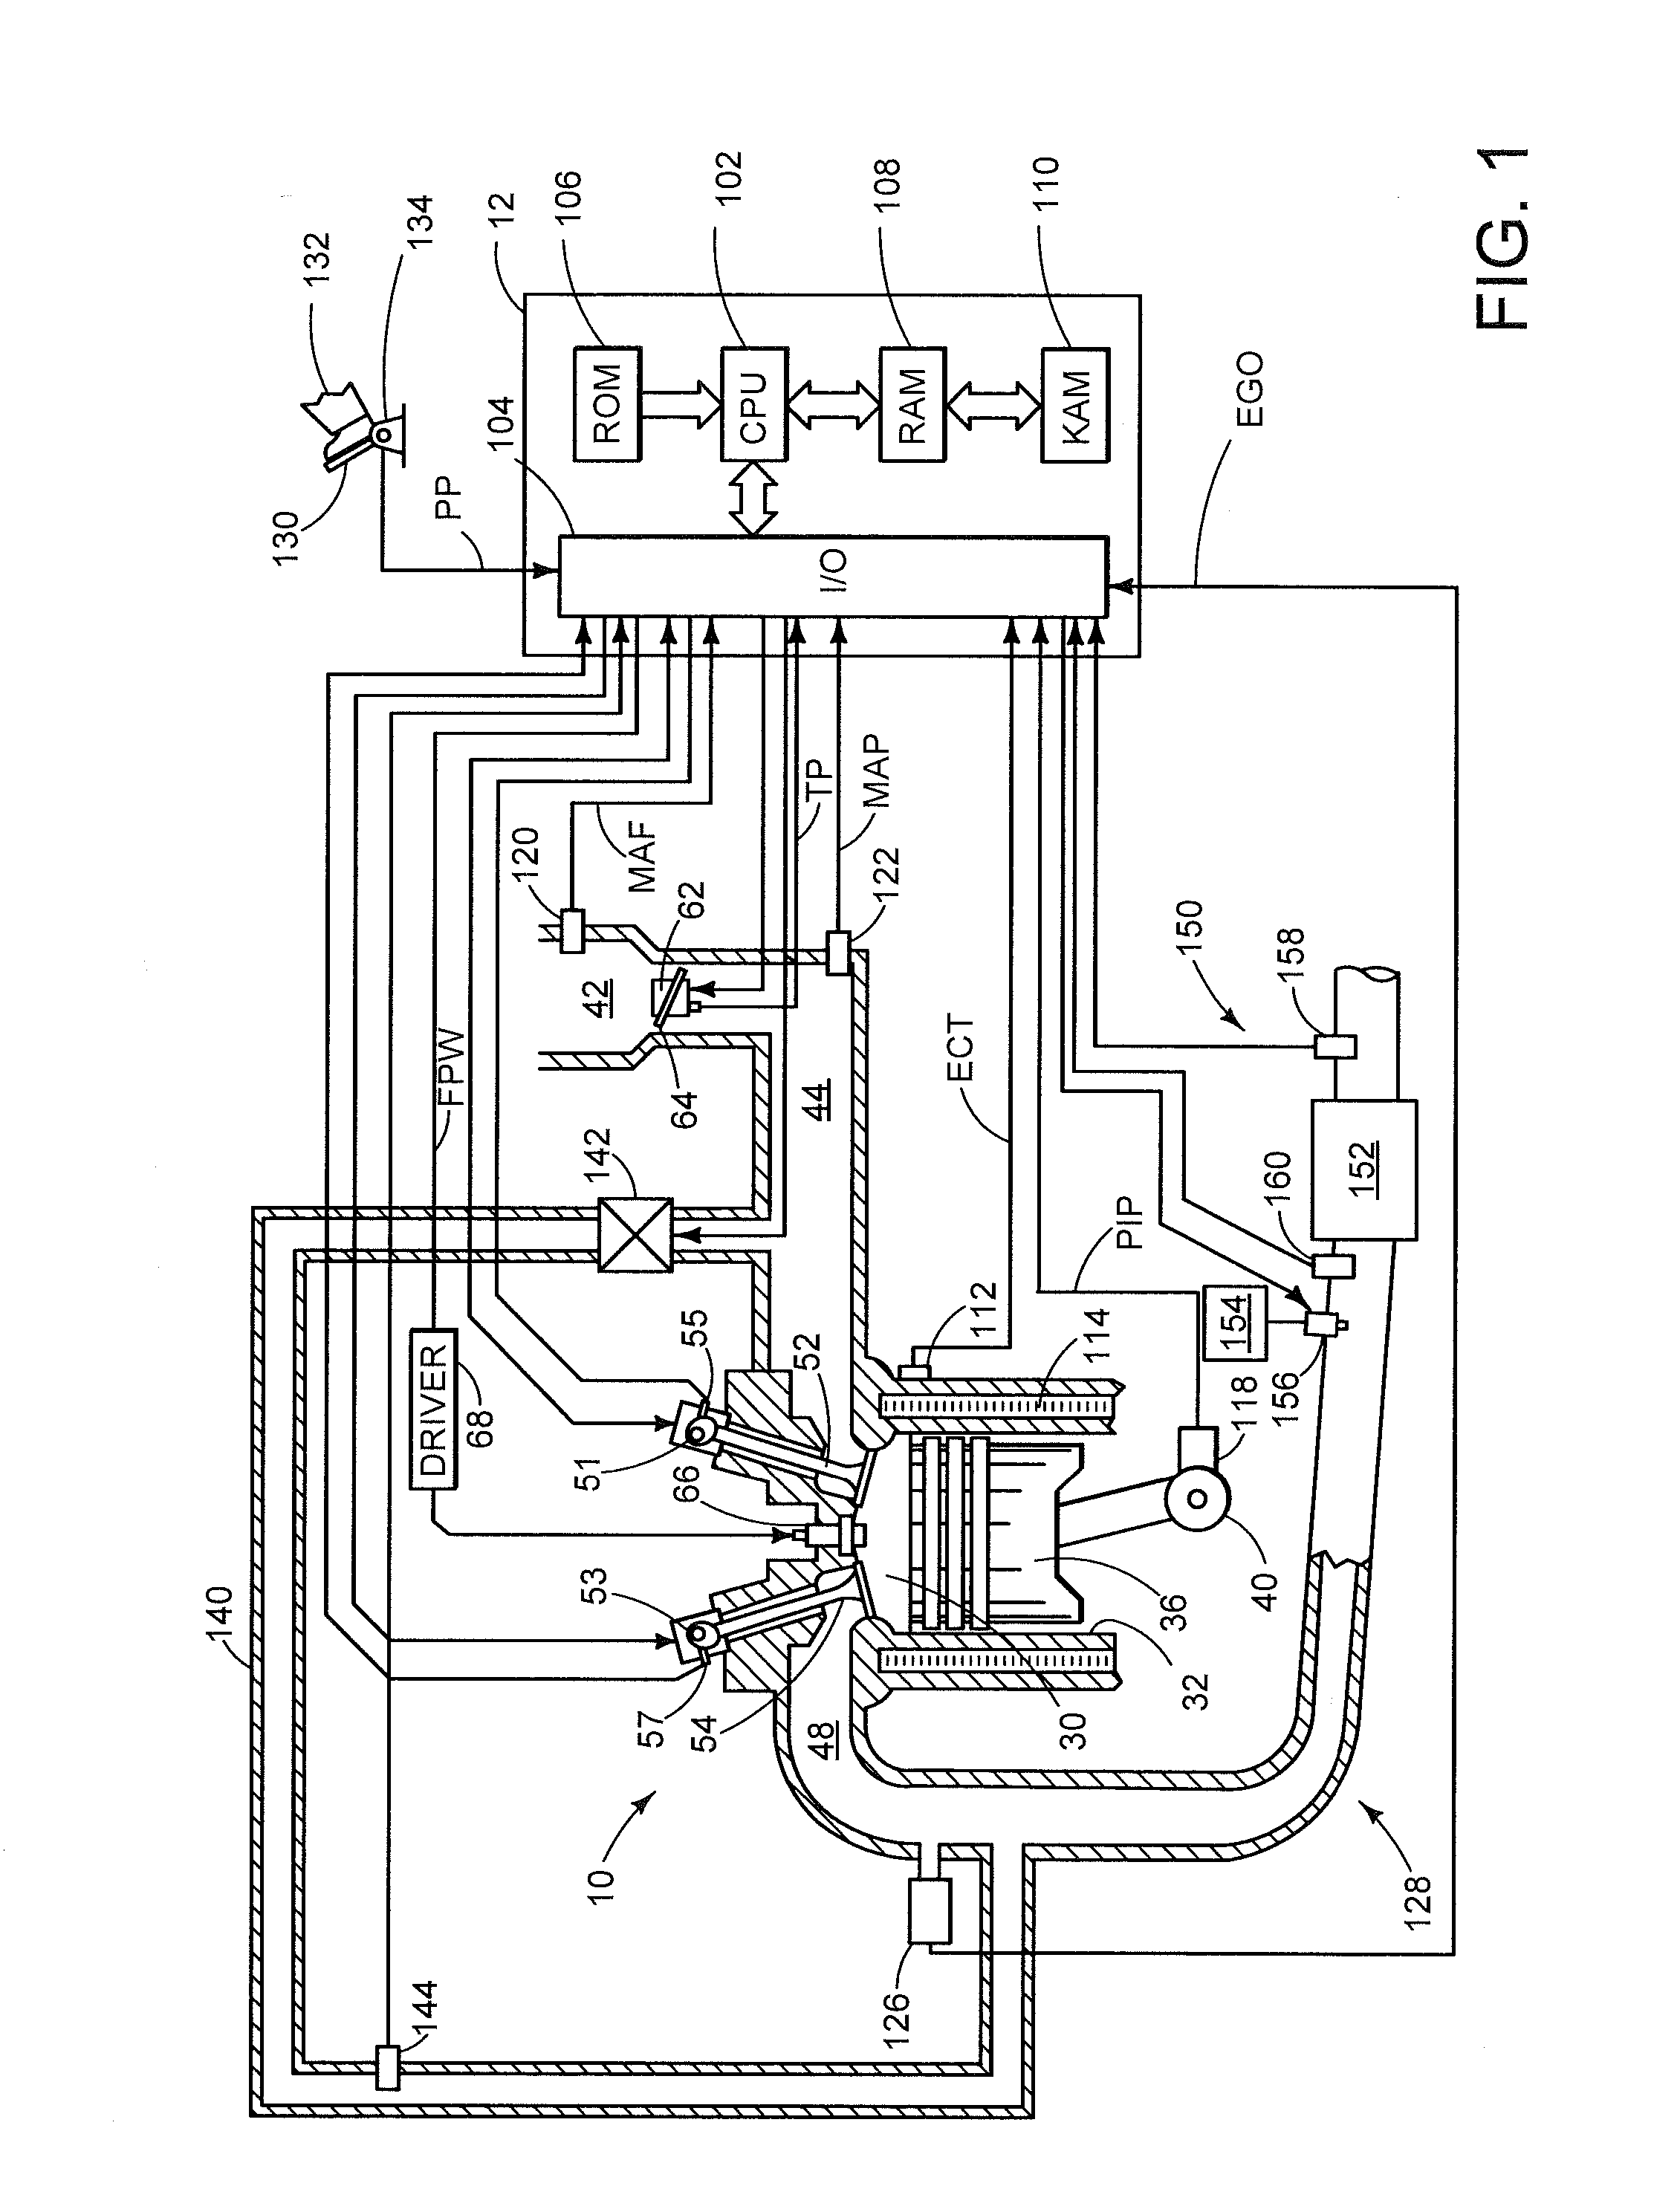 Method and system for reductant injector degradation